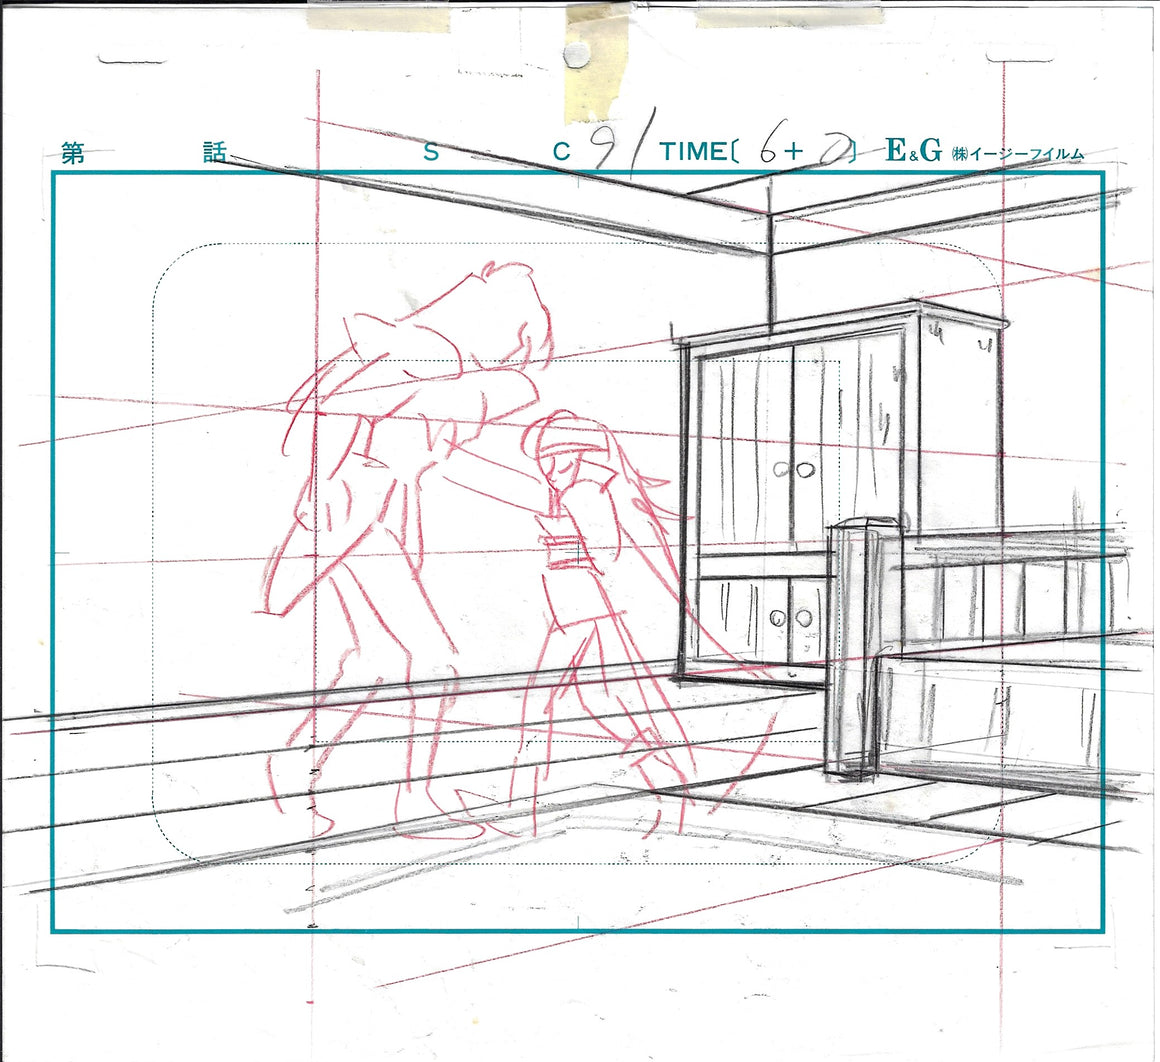 Slayers - Lina and Gourry in a hotel room - Key Master Setup w/ Douga & Concept Sketch